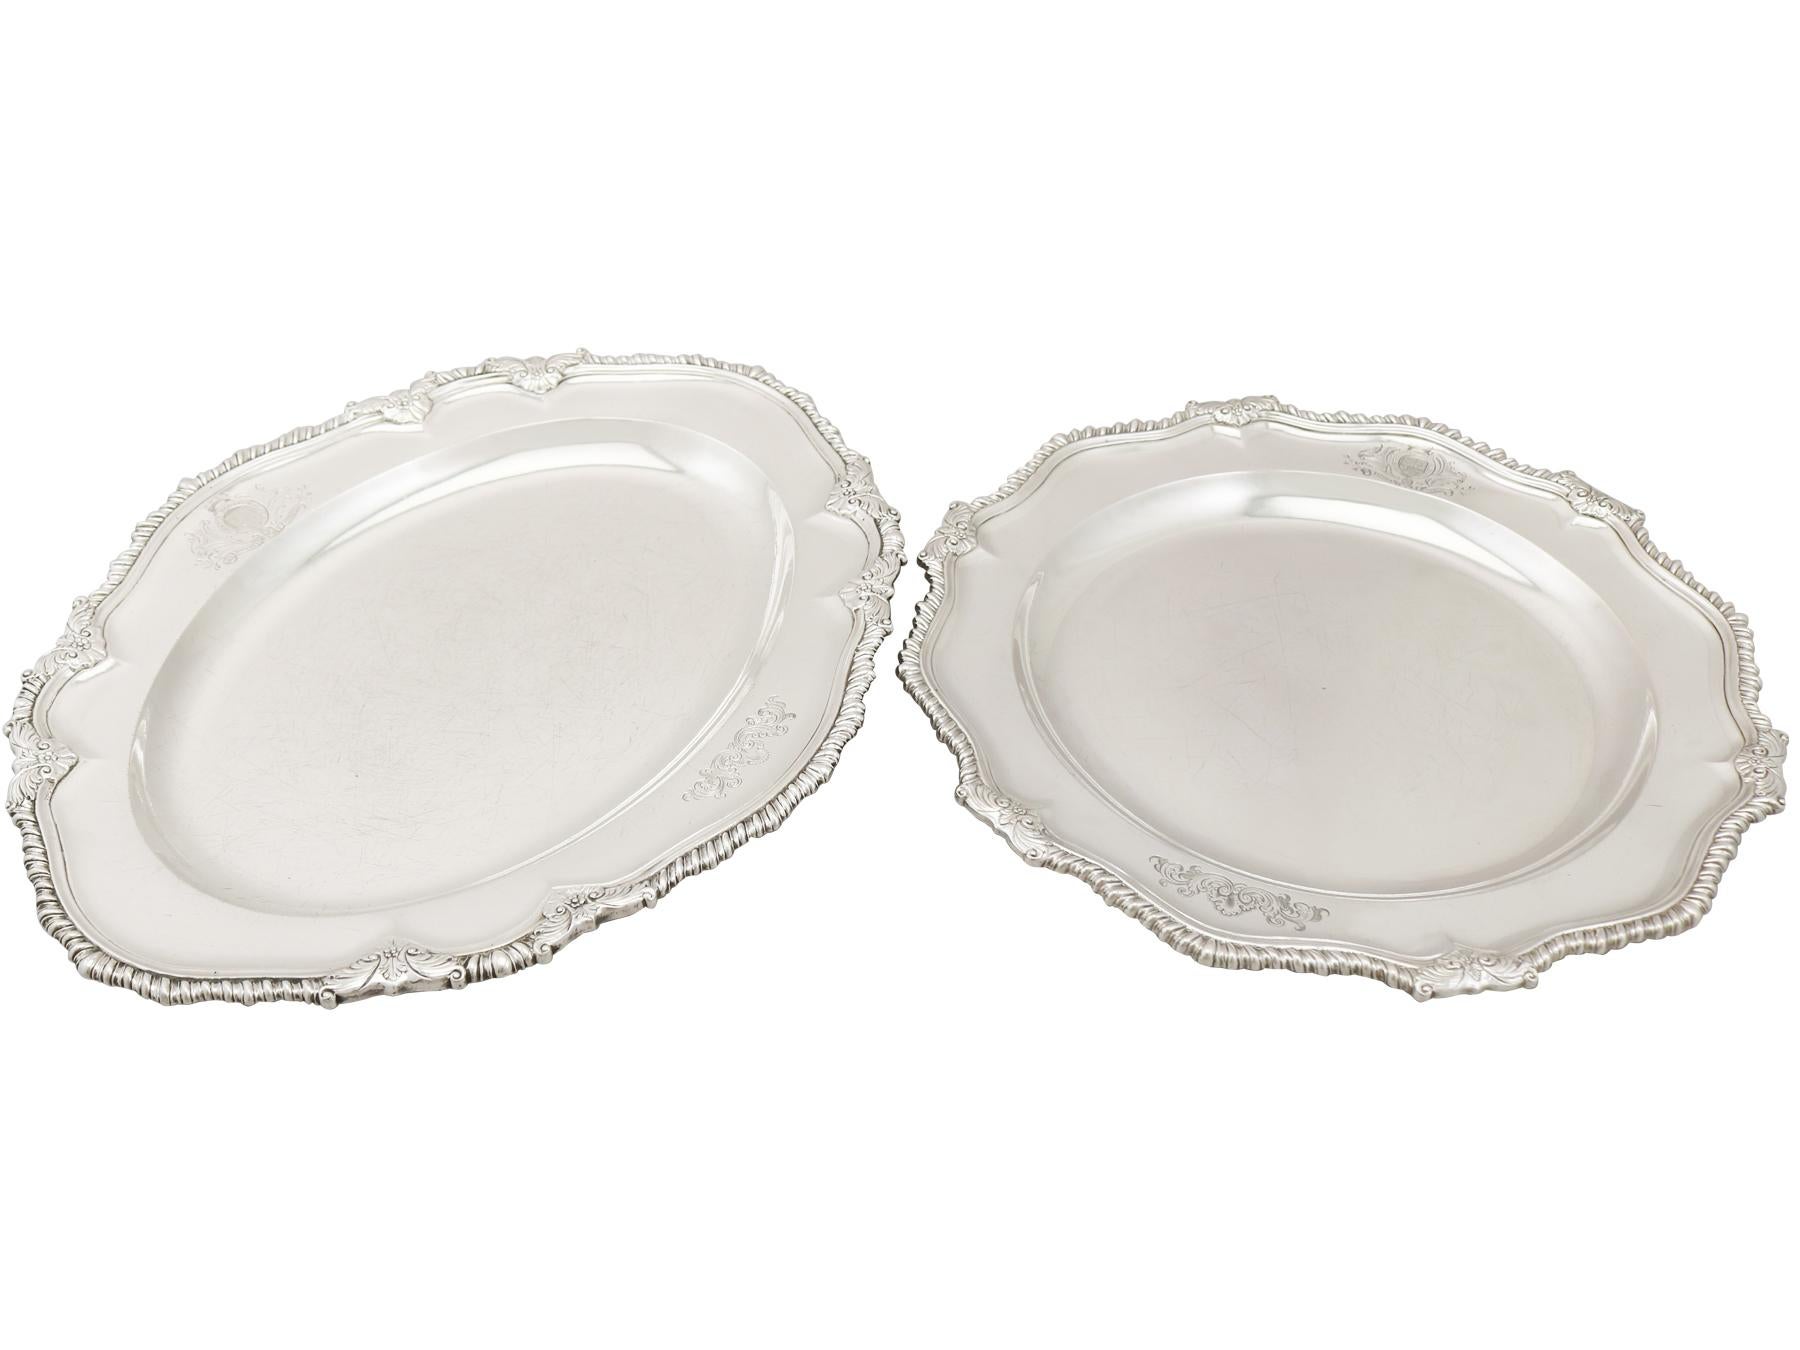 An exceptional, fine and impressive antique Georgian English sterling silver second course dish and meat platter; an addition to our dining silverware collection.

This exceptional antique George II sterling silver second course dish has a plain